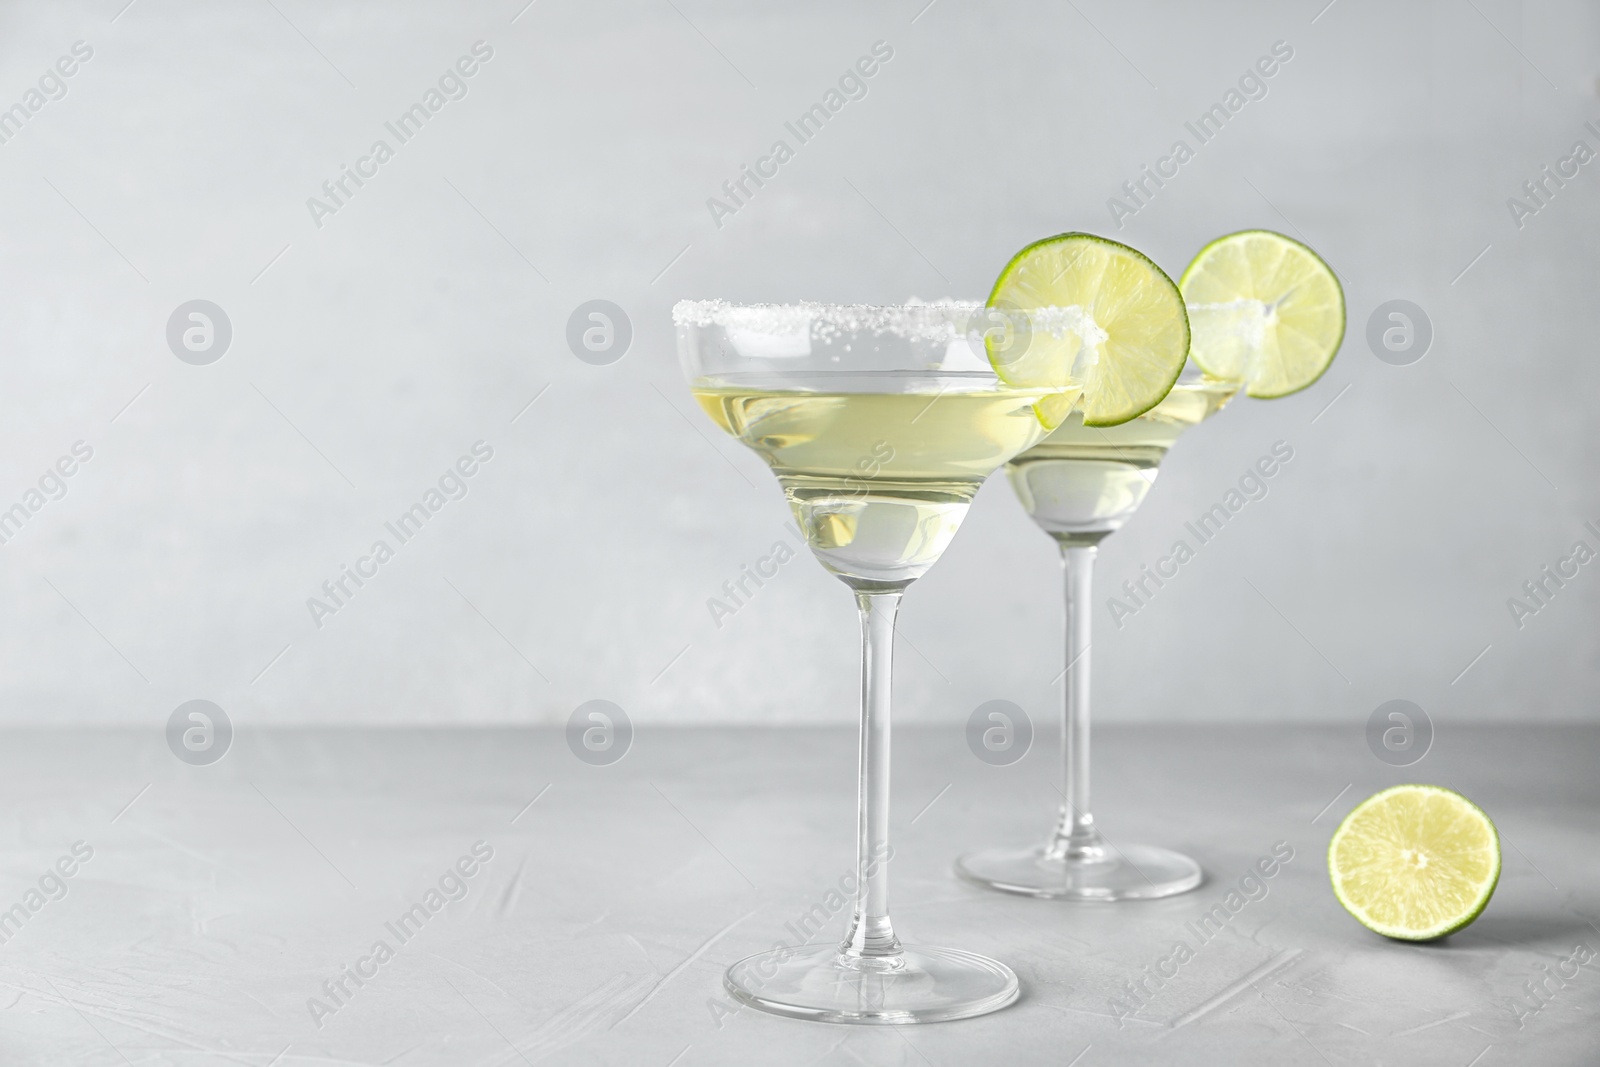 Photo of Glasses of lemon drop martini cocktail with lime slice on light table against grey background. Space for text